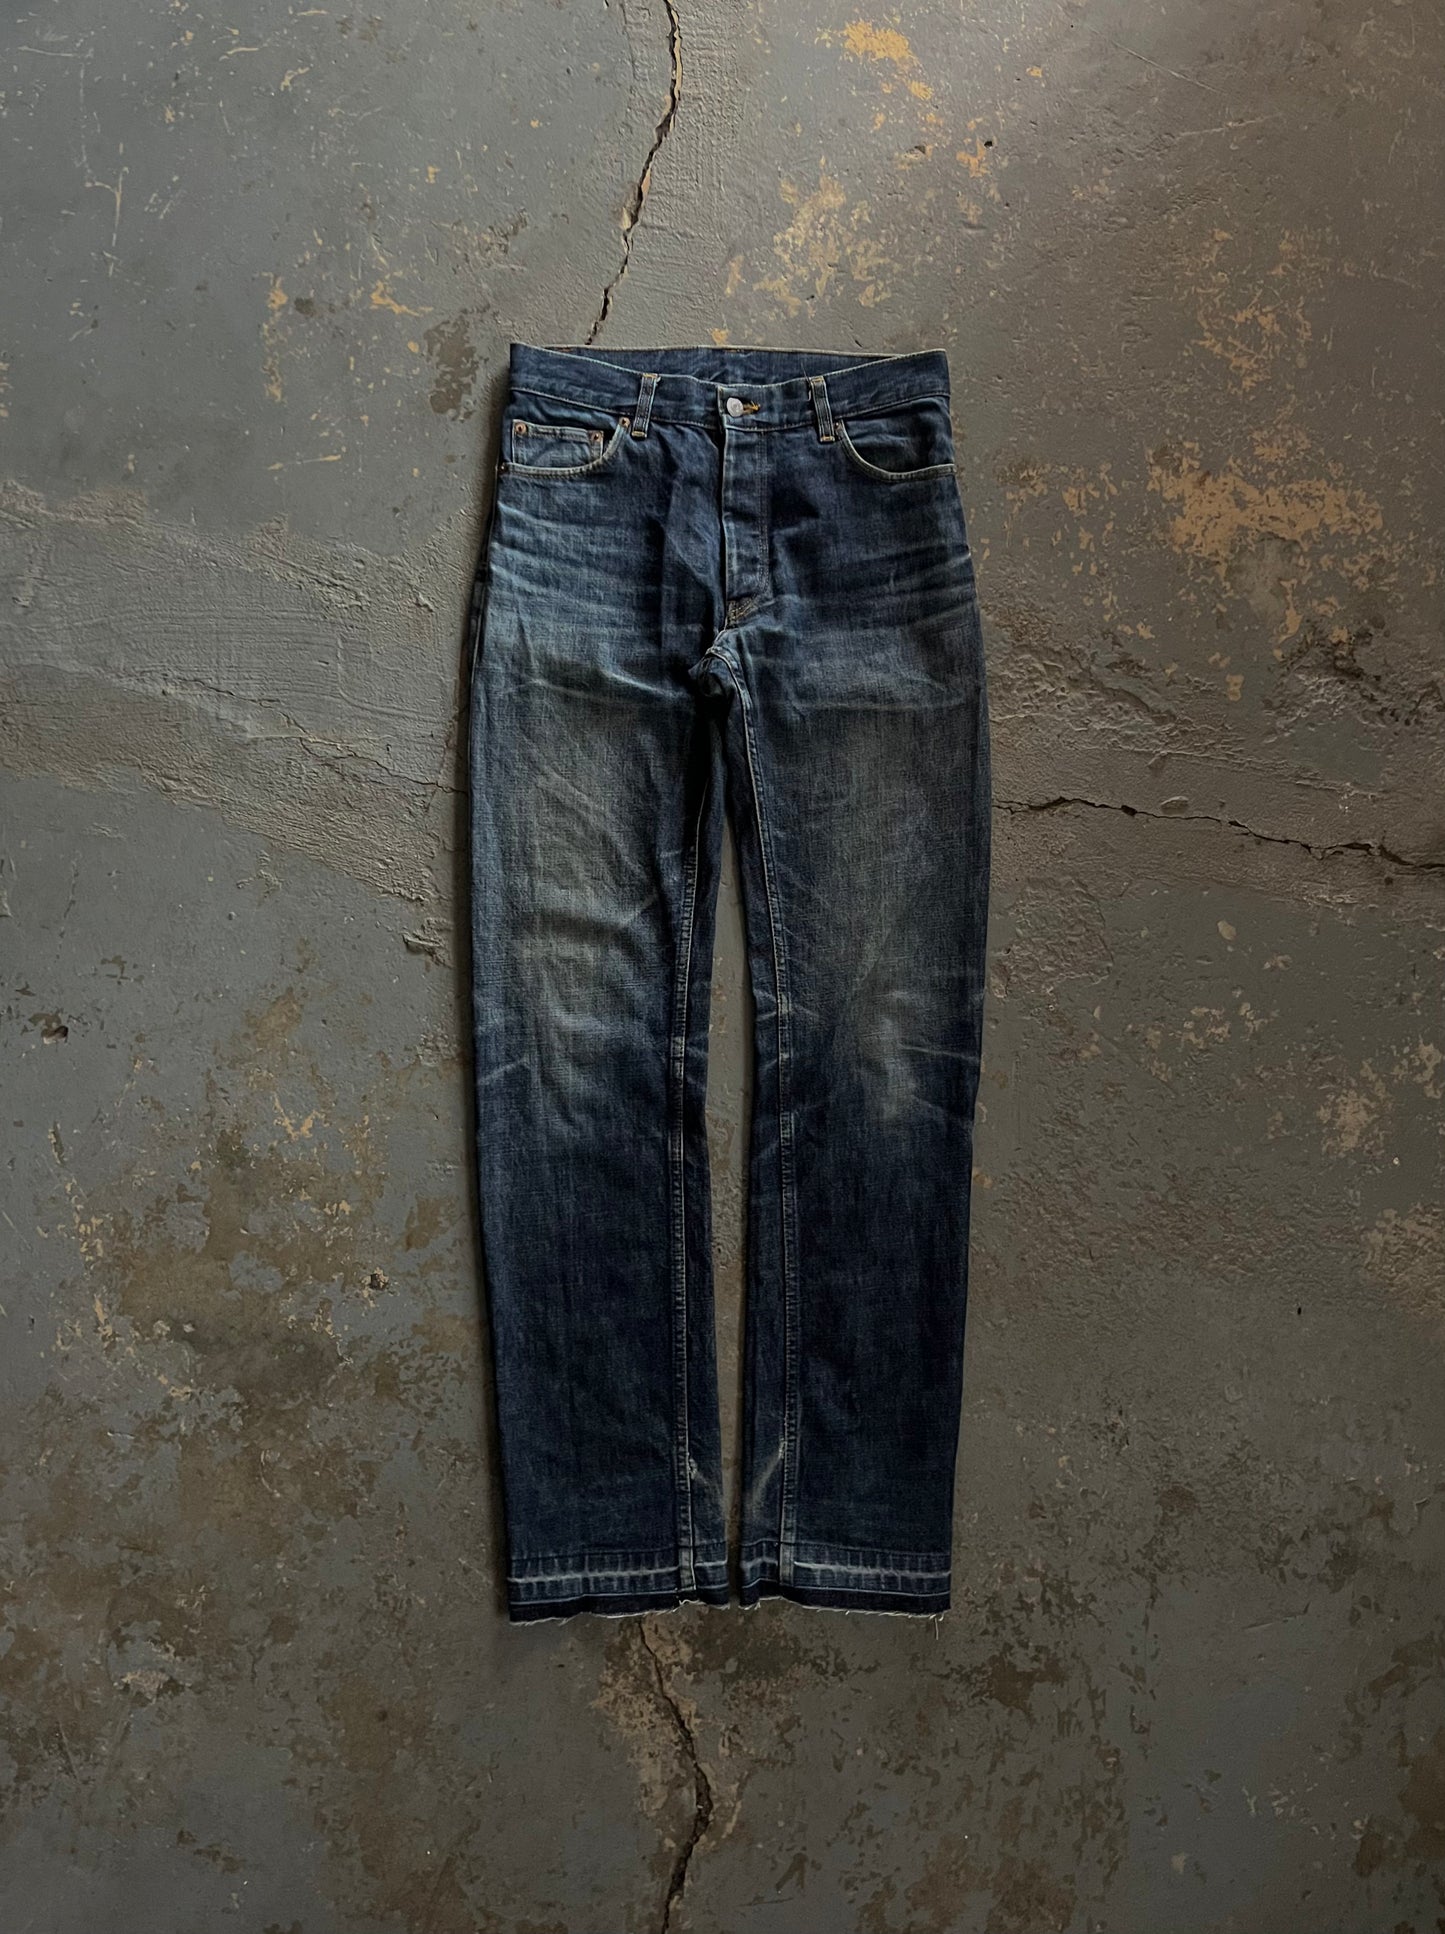 Helmut Lang AW97 Raw Jeans